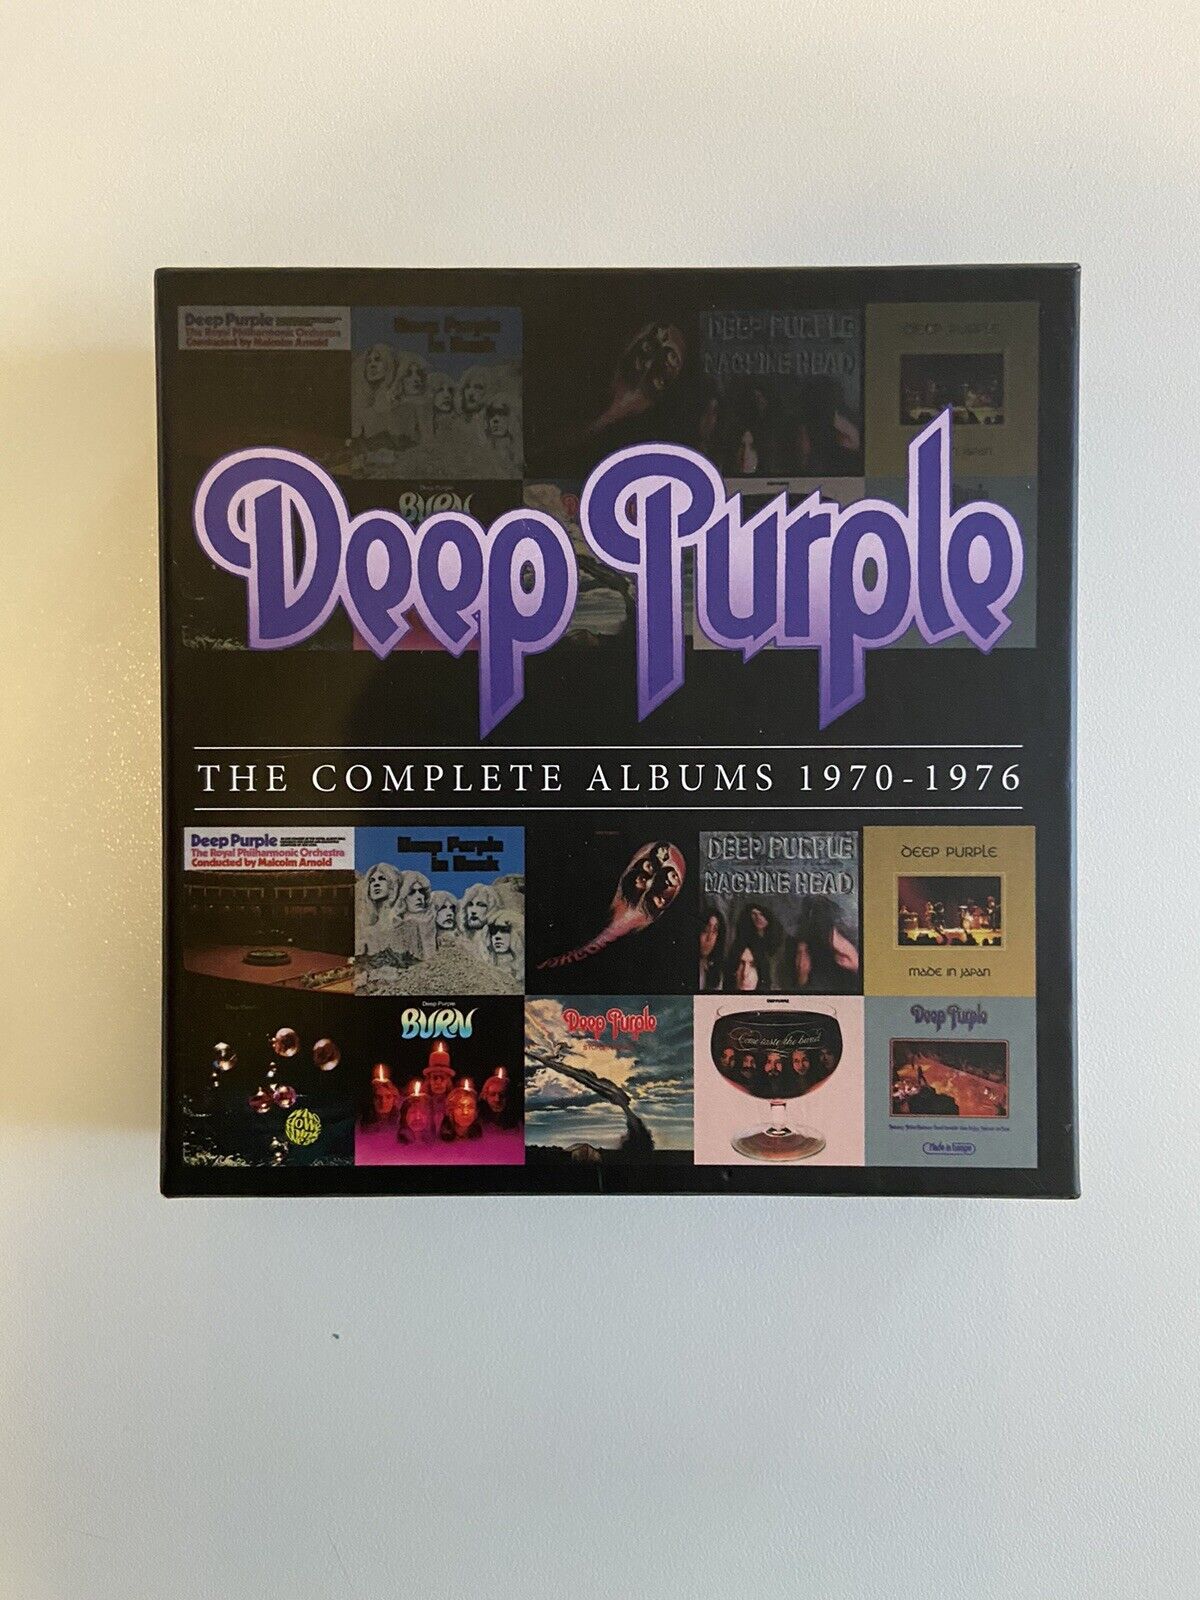 The Complete Albums 1970-1976 [Box] by Deep Purple (CD, Oct-2013, 10 Discs)